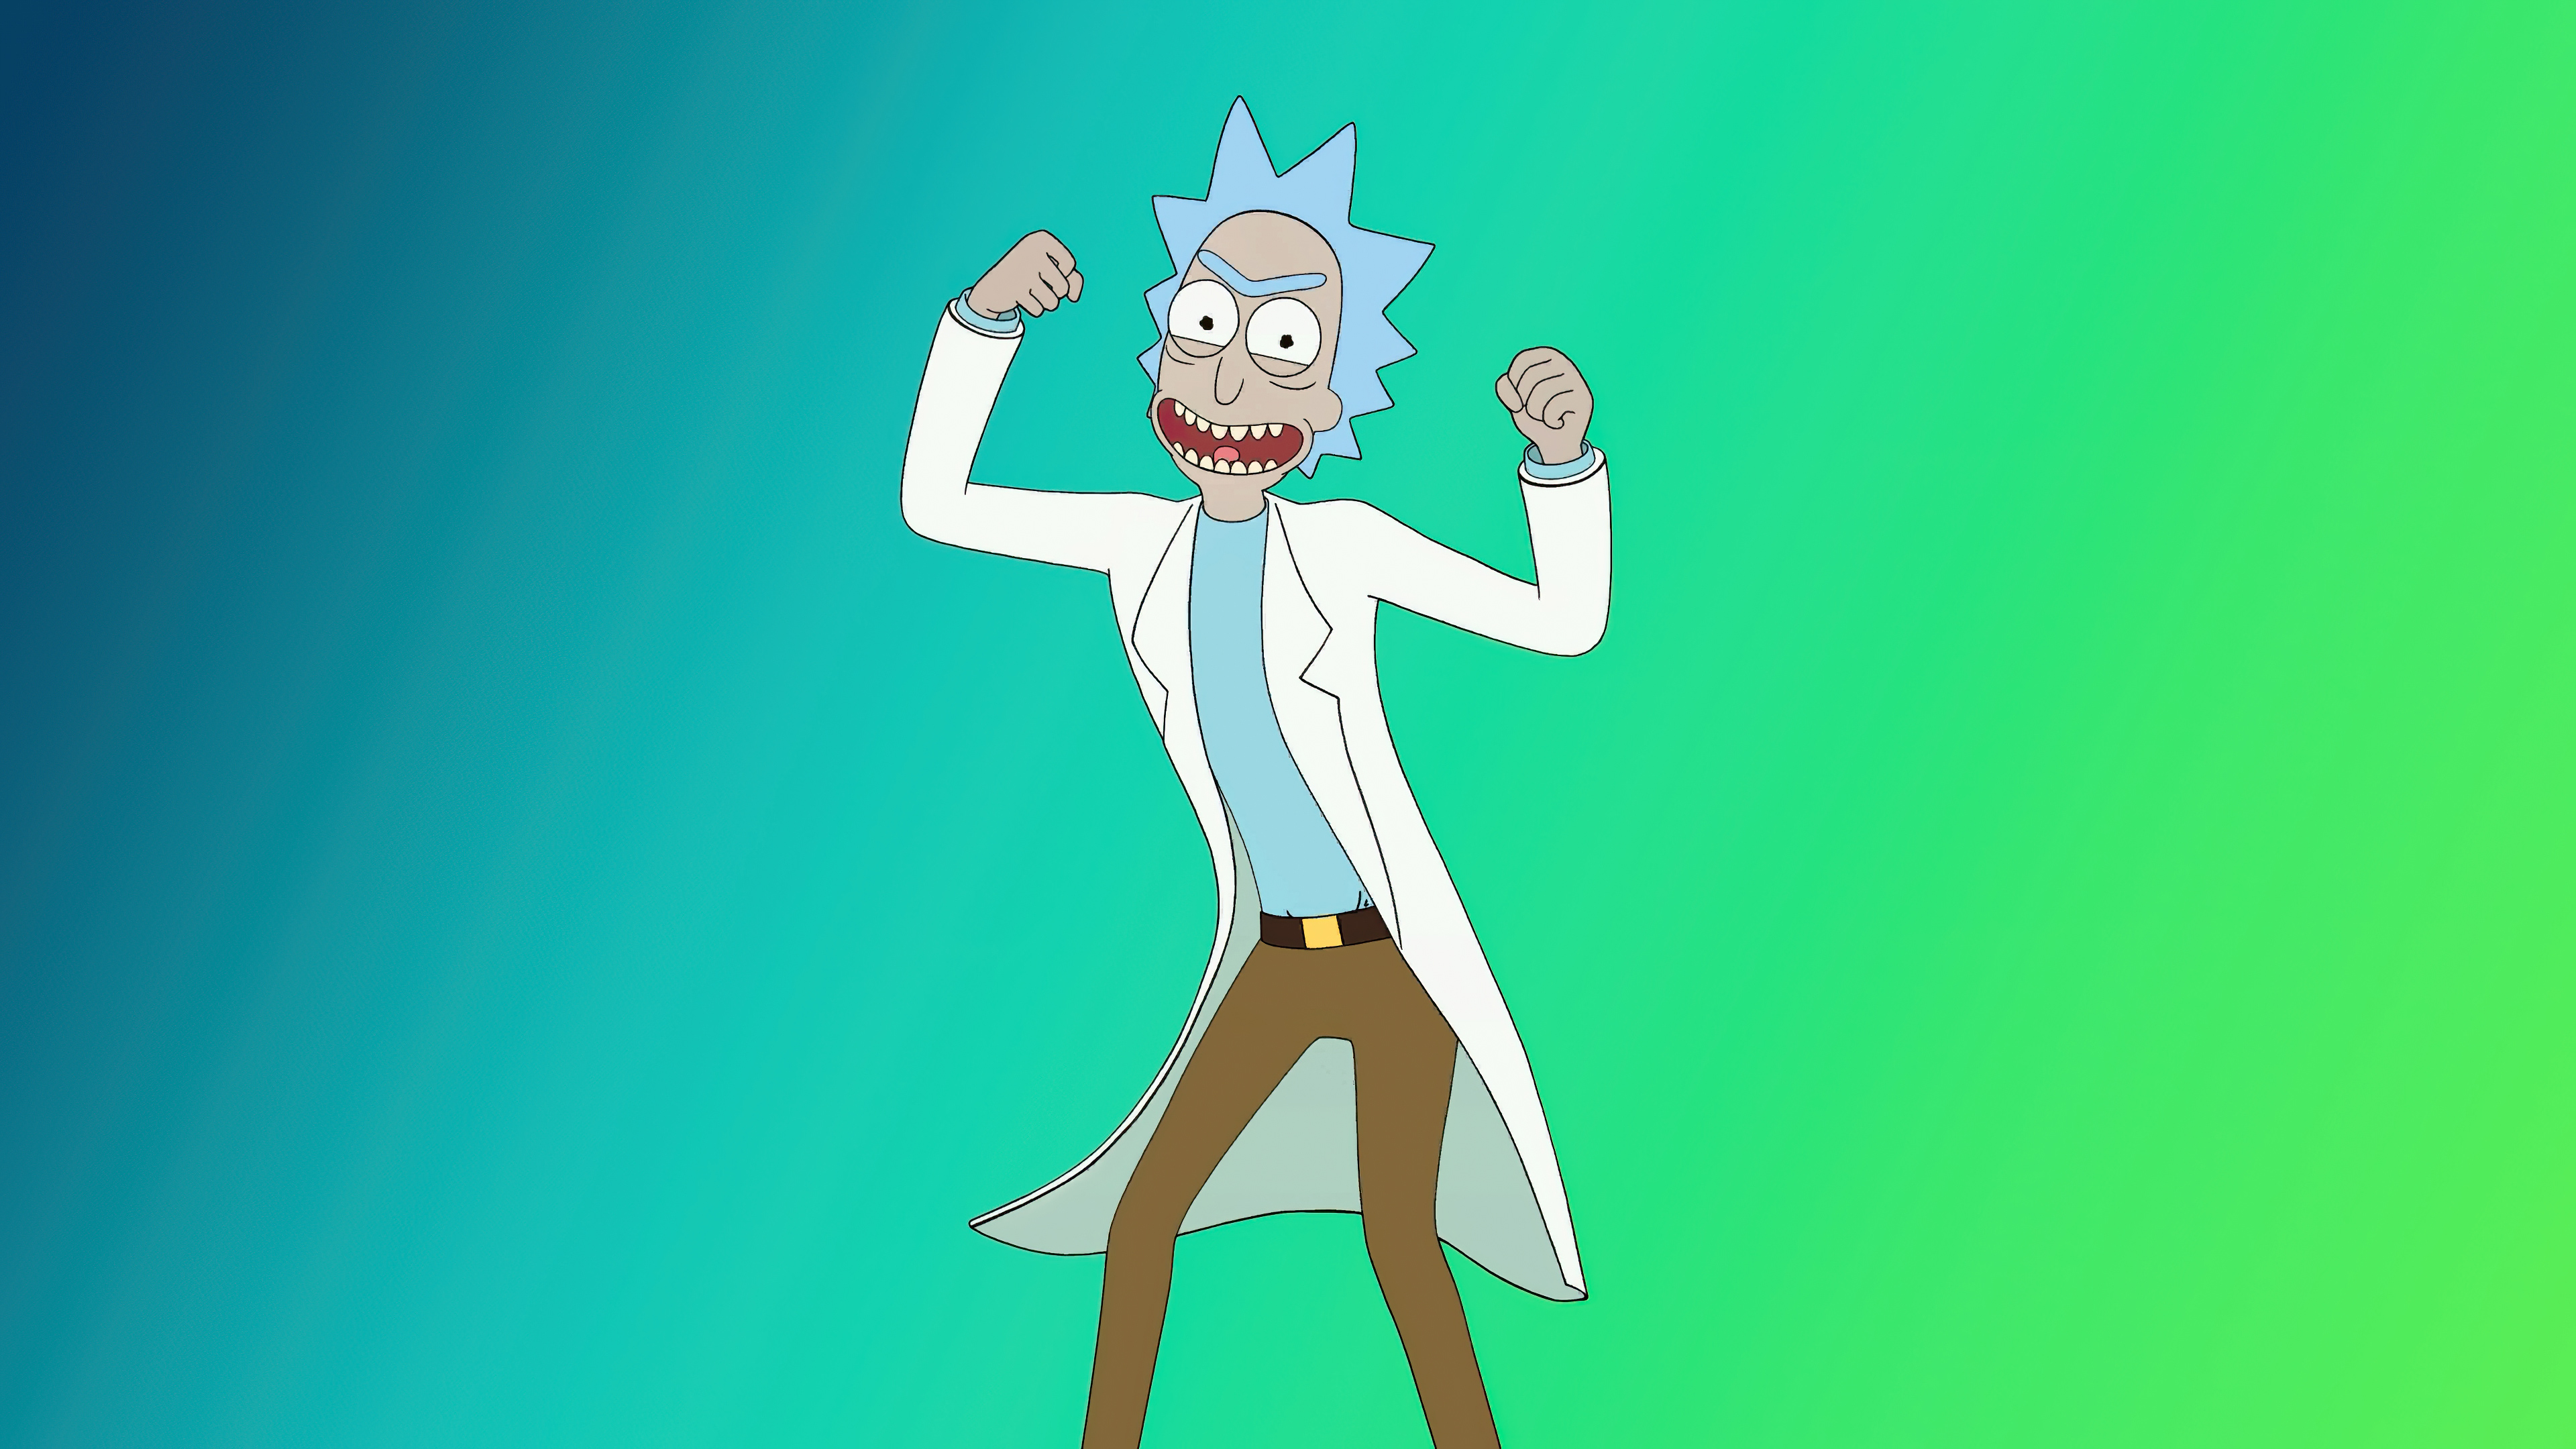 Wallpapers Rick TV show rick and morty on the desktop